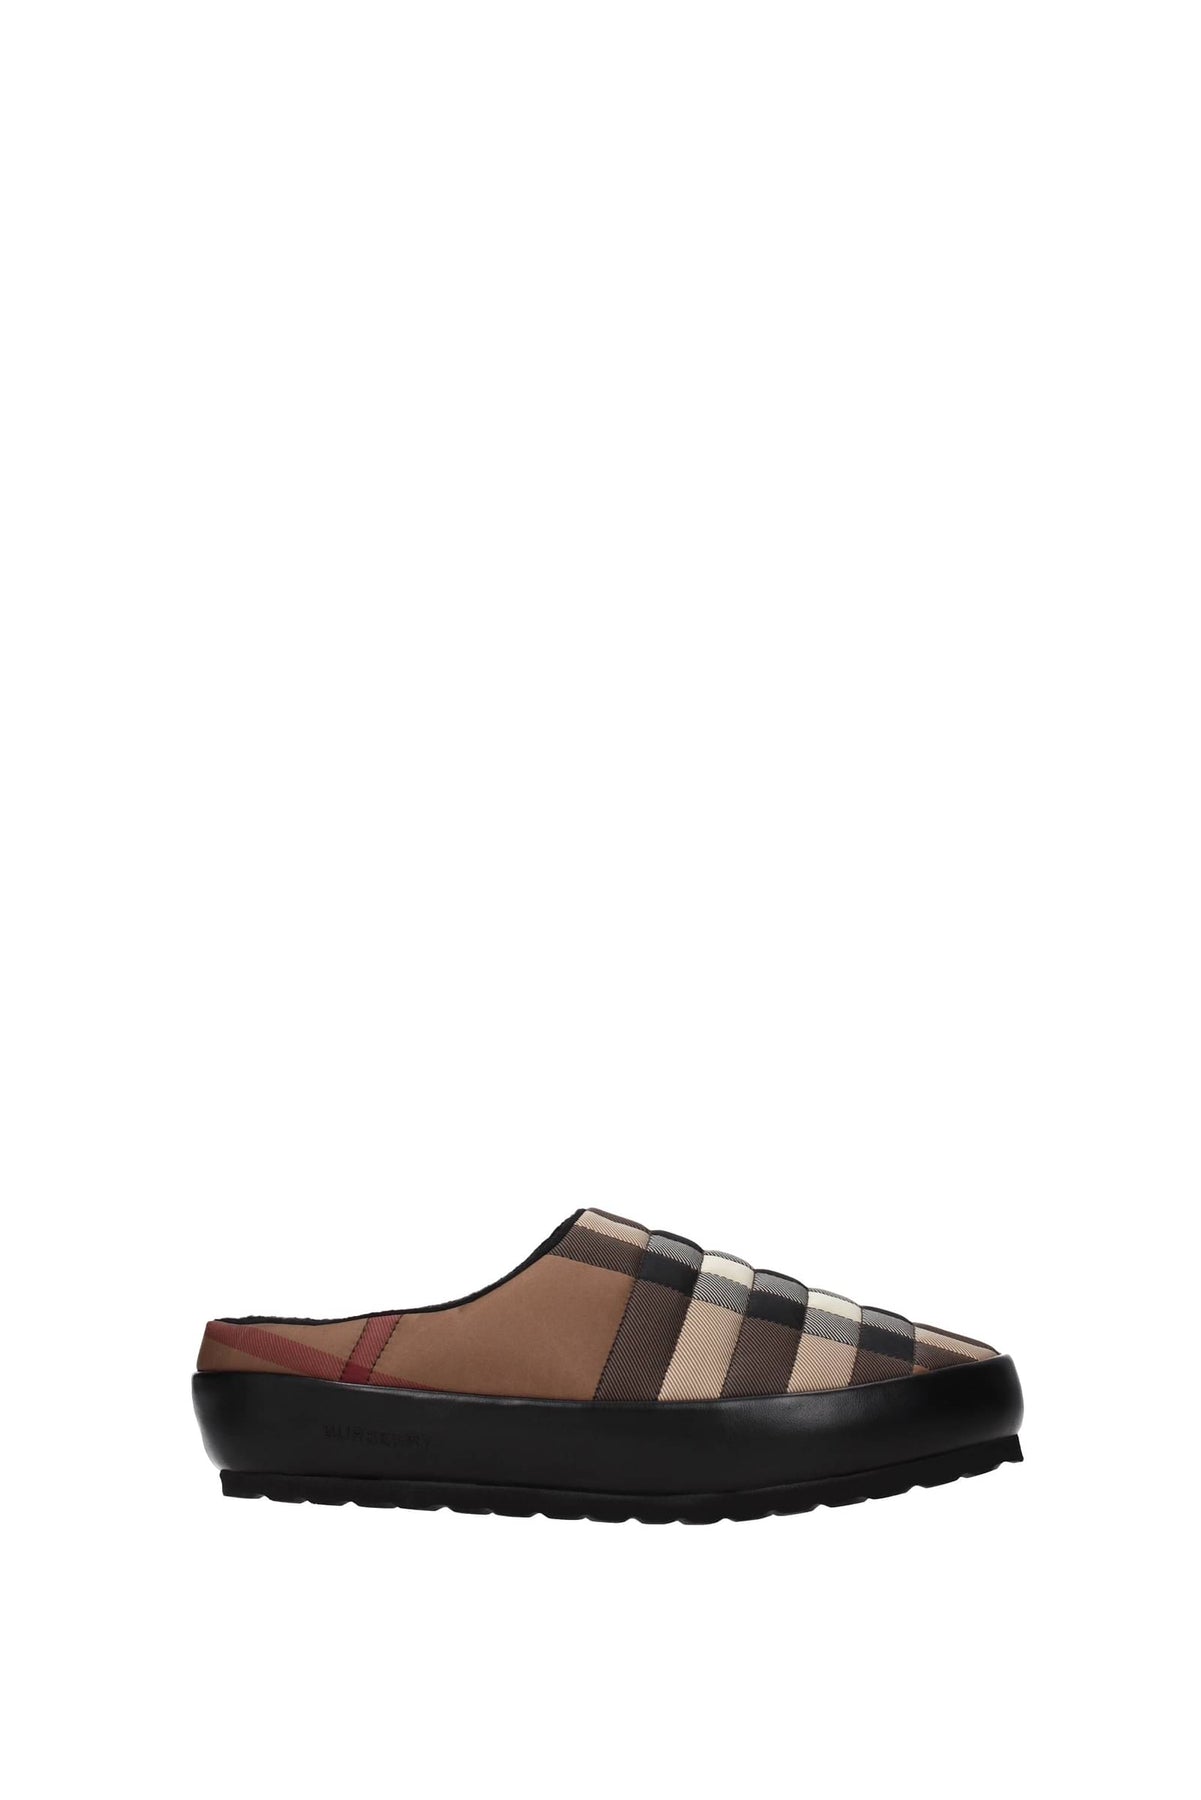 BURBERRY SLIPPERS AND CLOGS FABRIC BROWN BIRCH